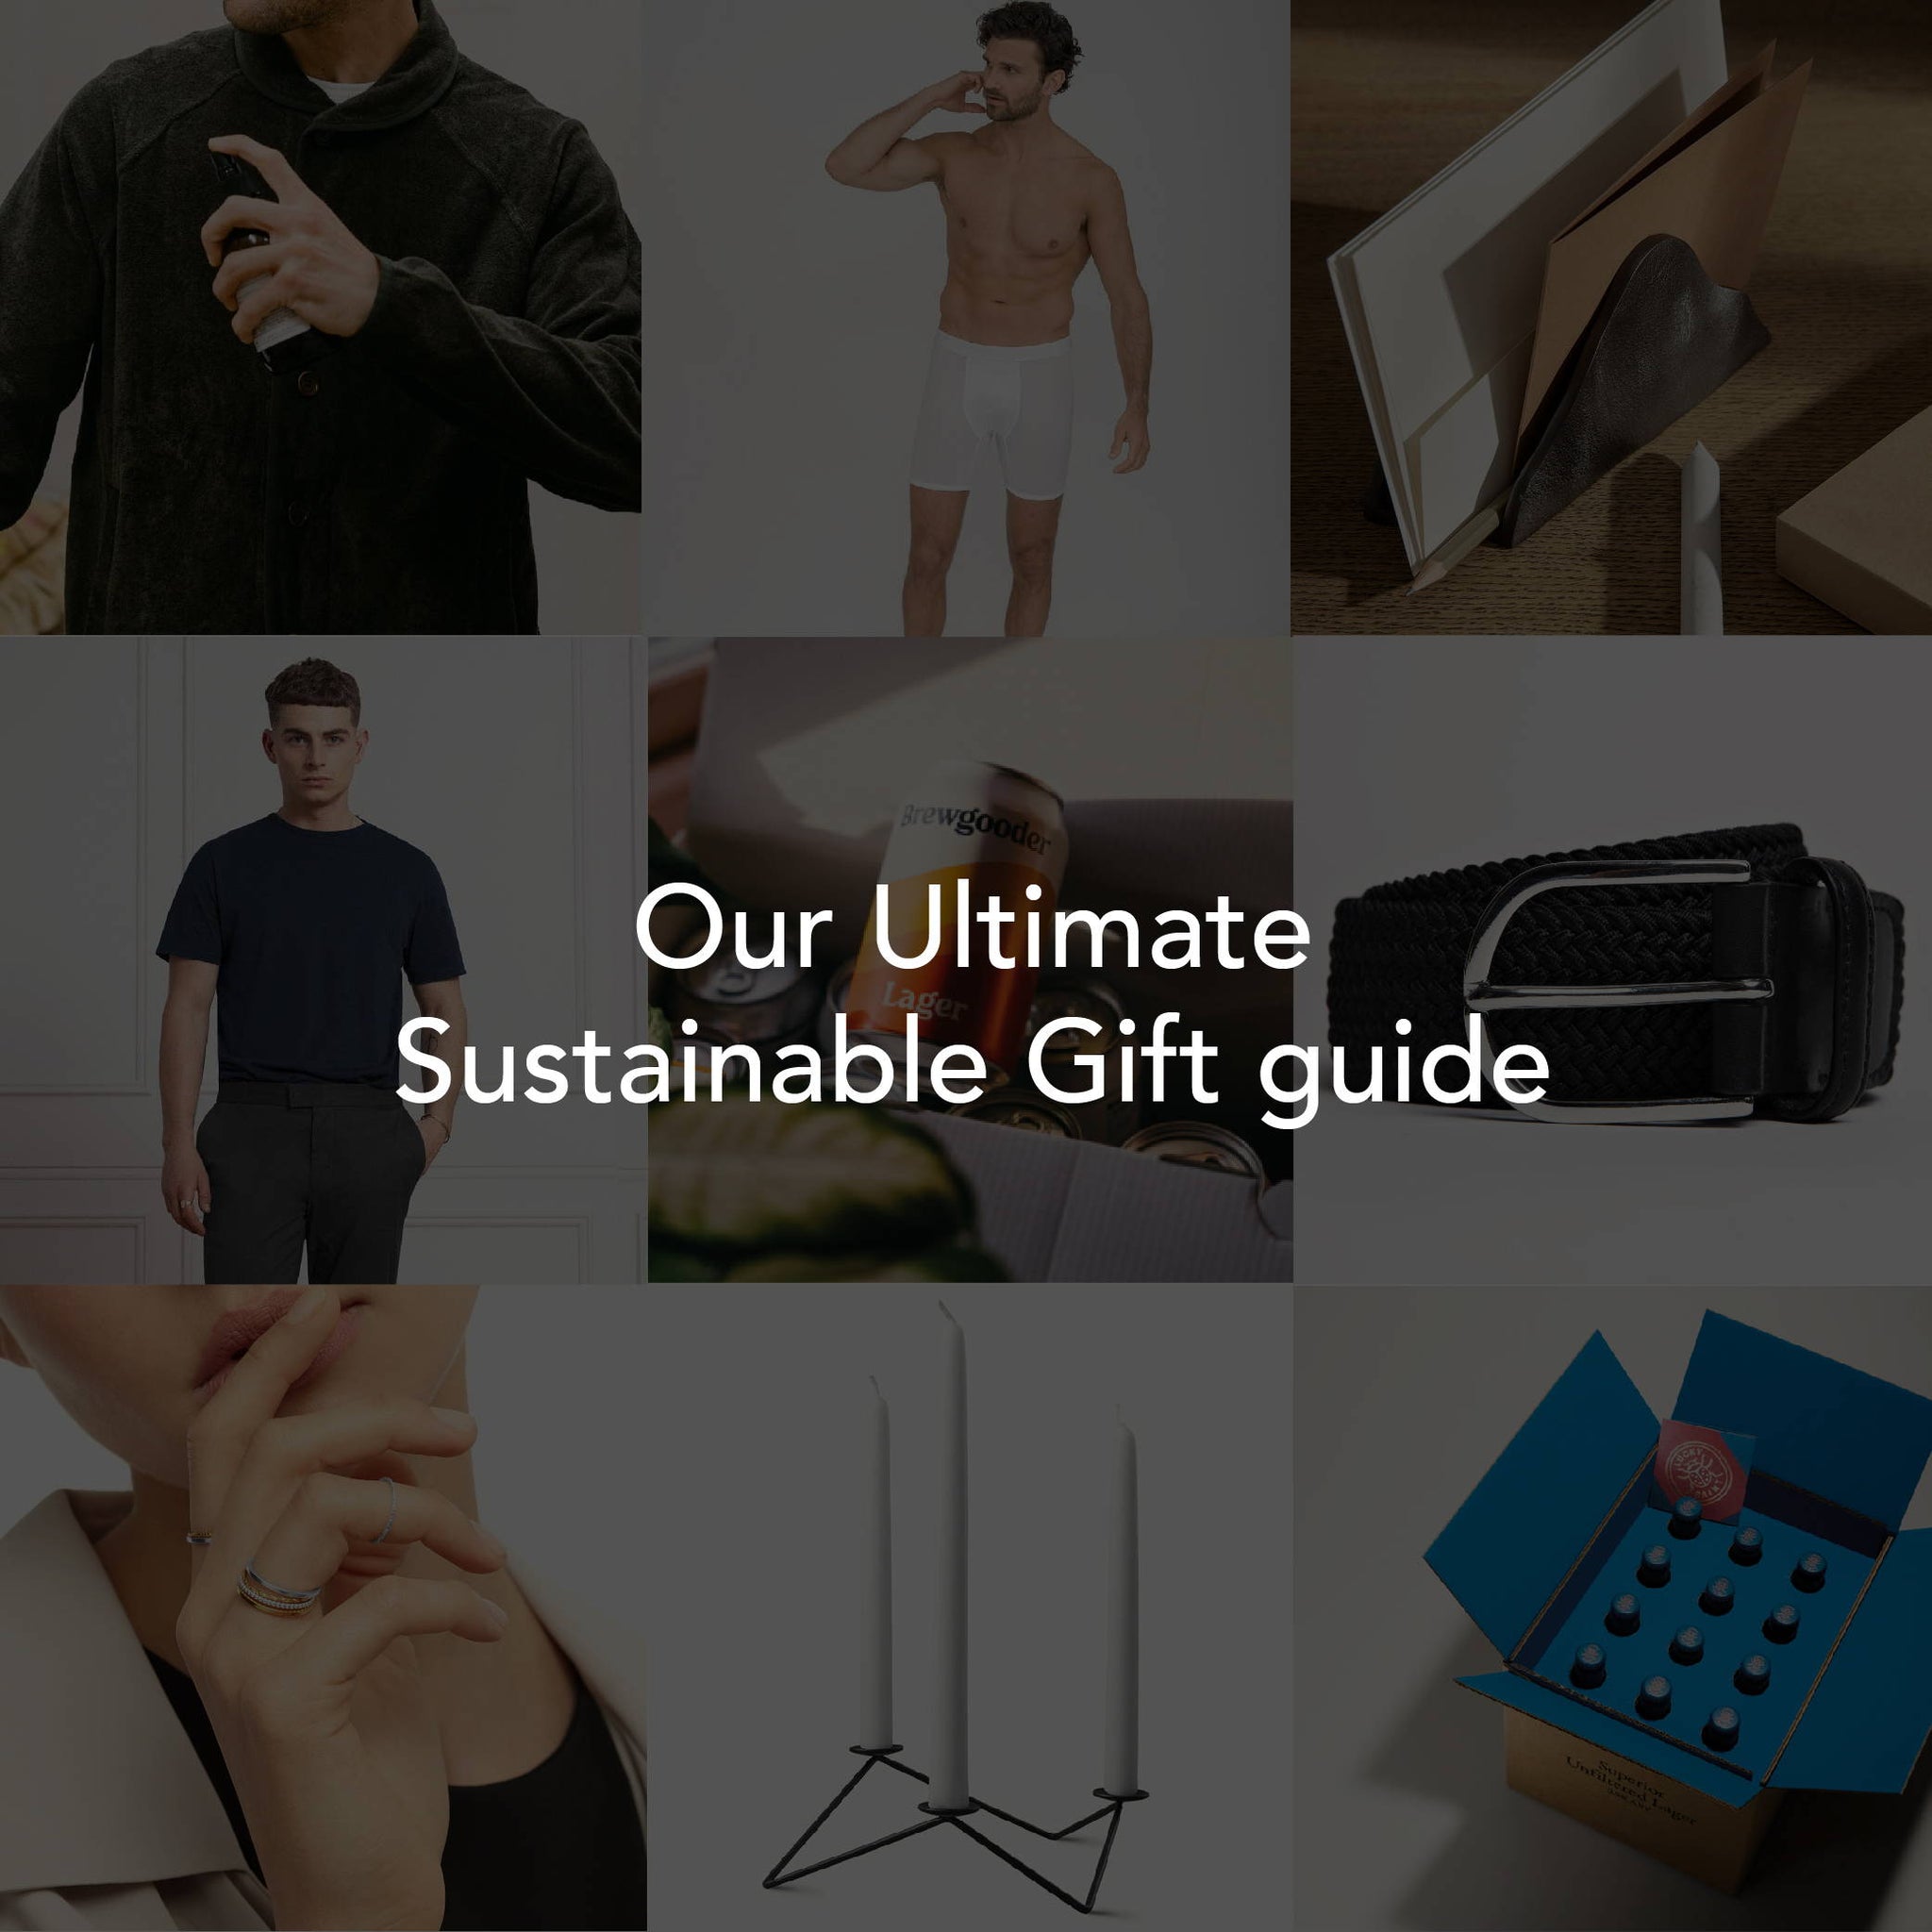 The Ultimate Sustainable Gift Guide